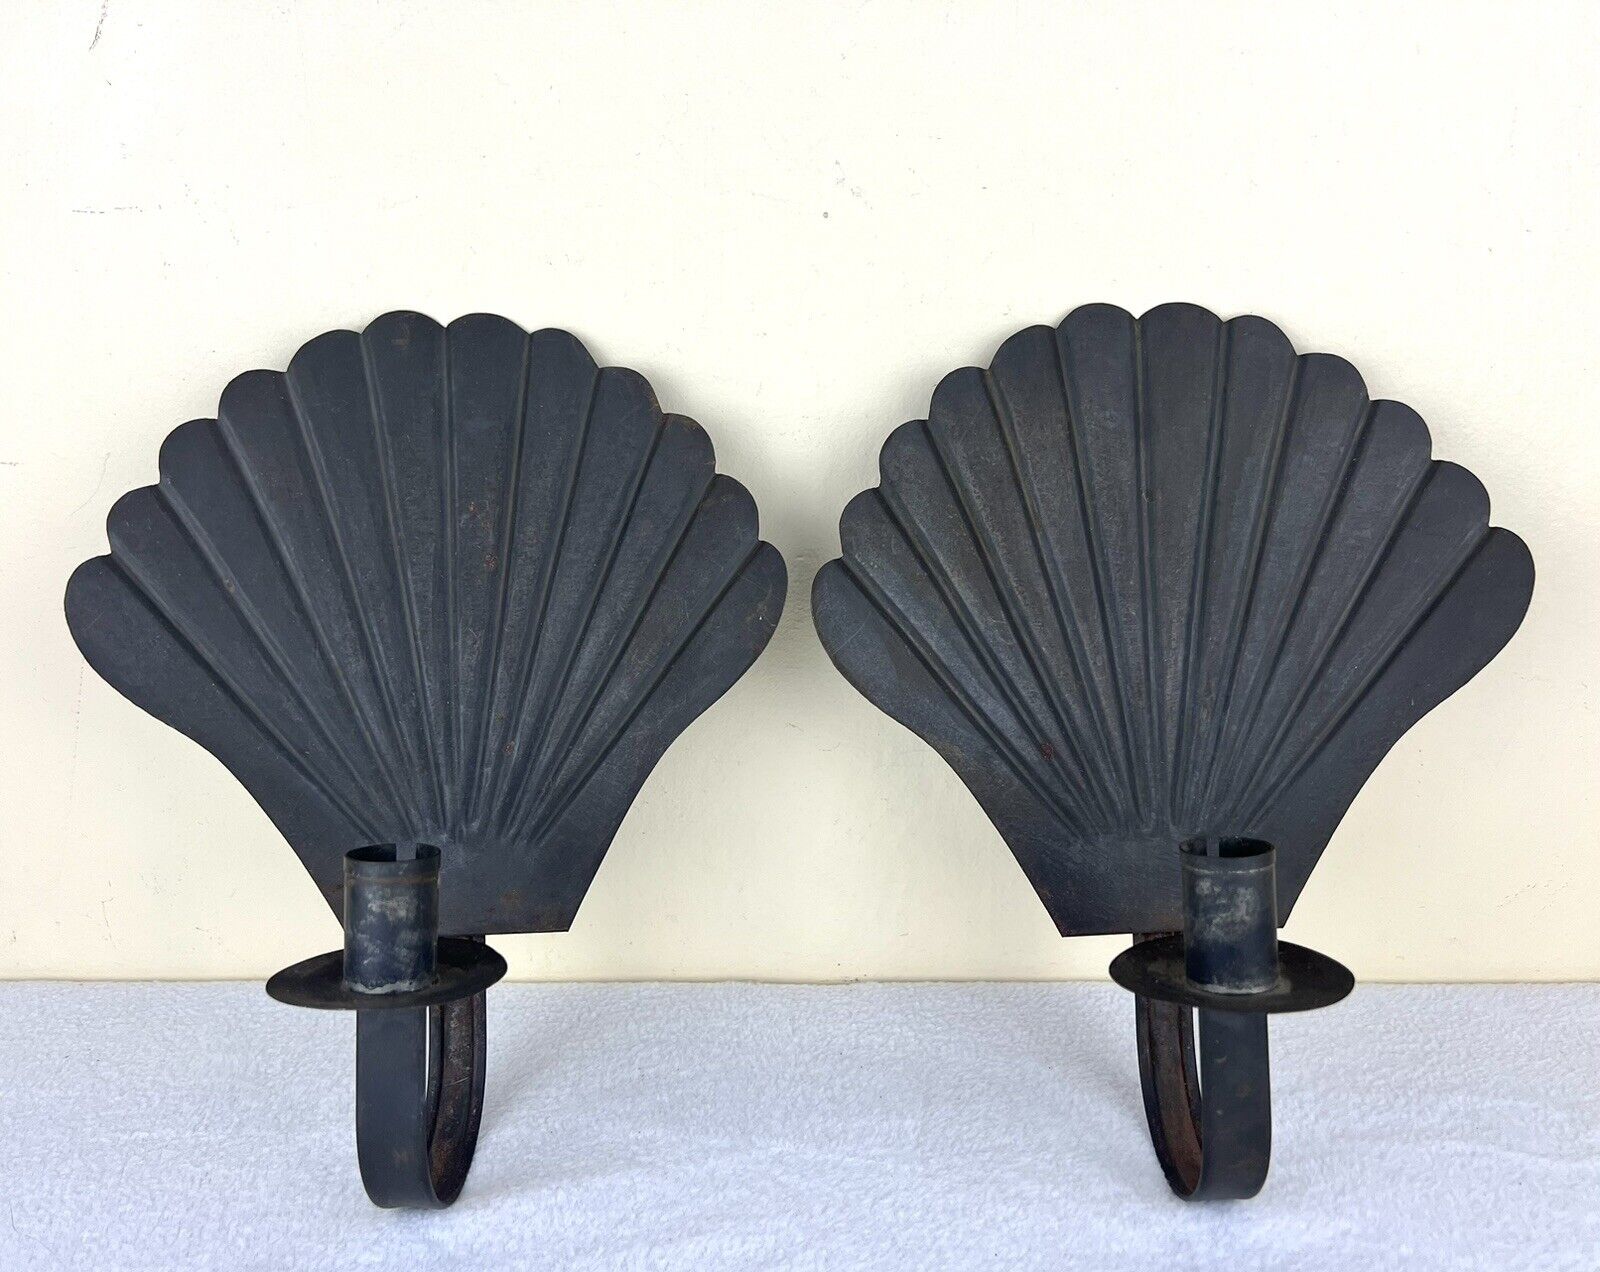 Pair Of Vintage Tin Fan Shaped Wall Taper Candle Sconces 10.25” Primitive Style